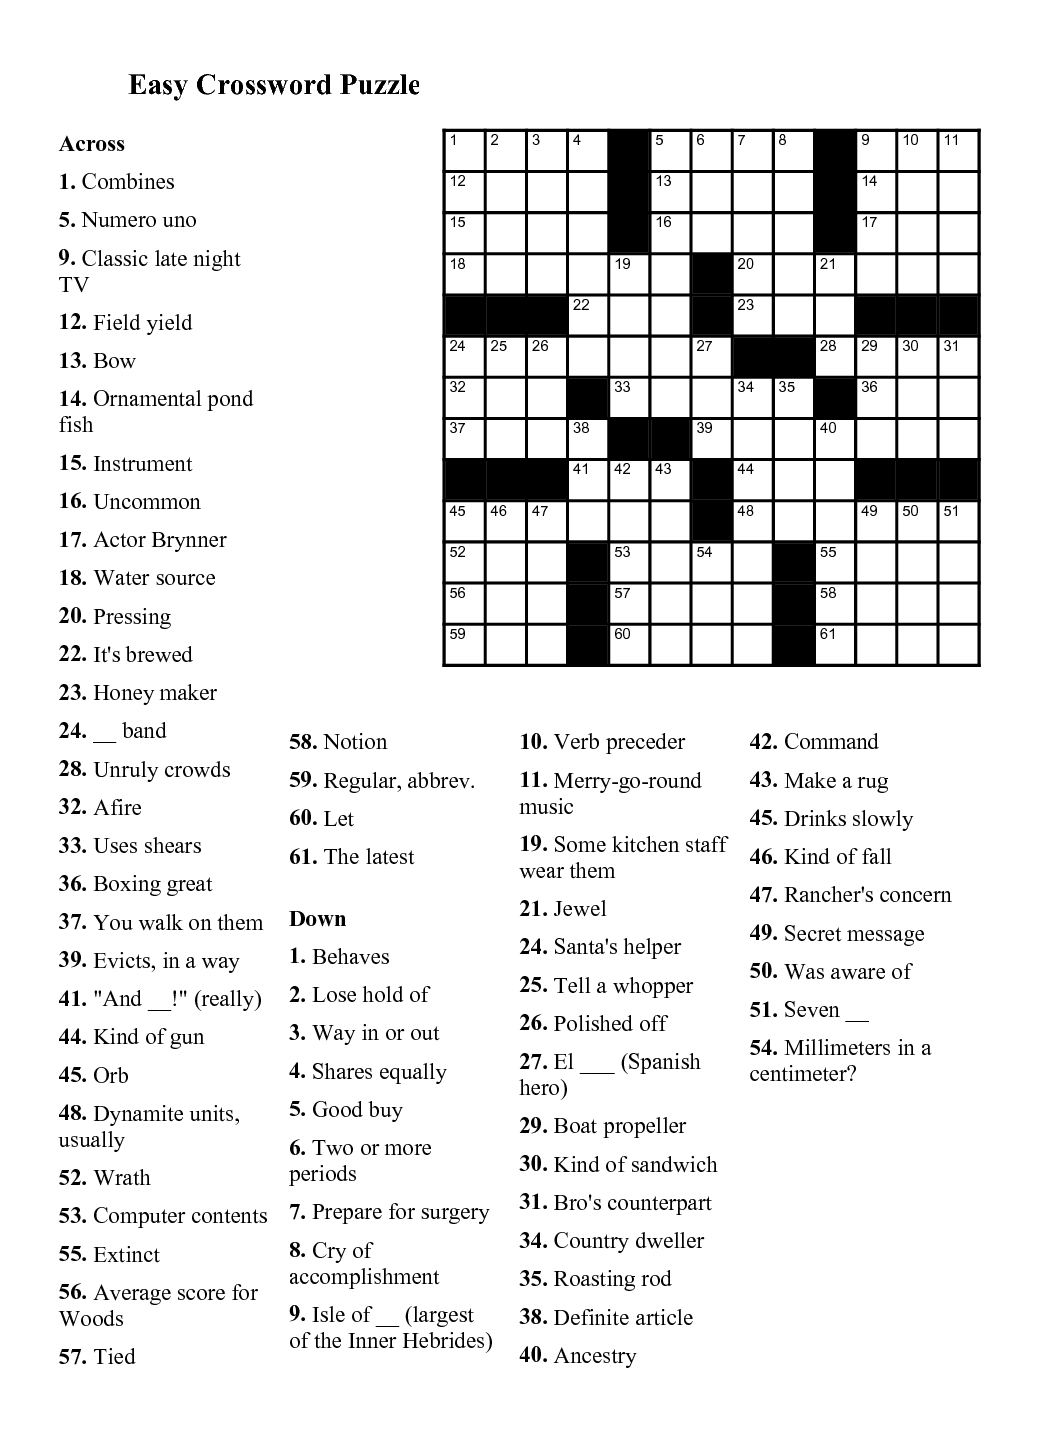 Easy Crossword Puzzles Printable Daily Template - Crossword Puzzle Printable In Spanish